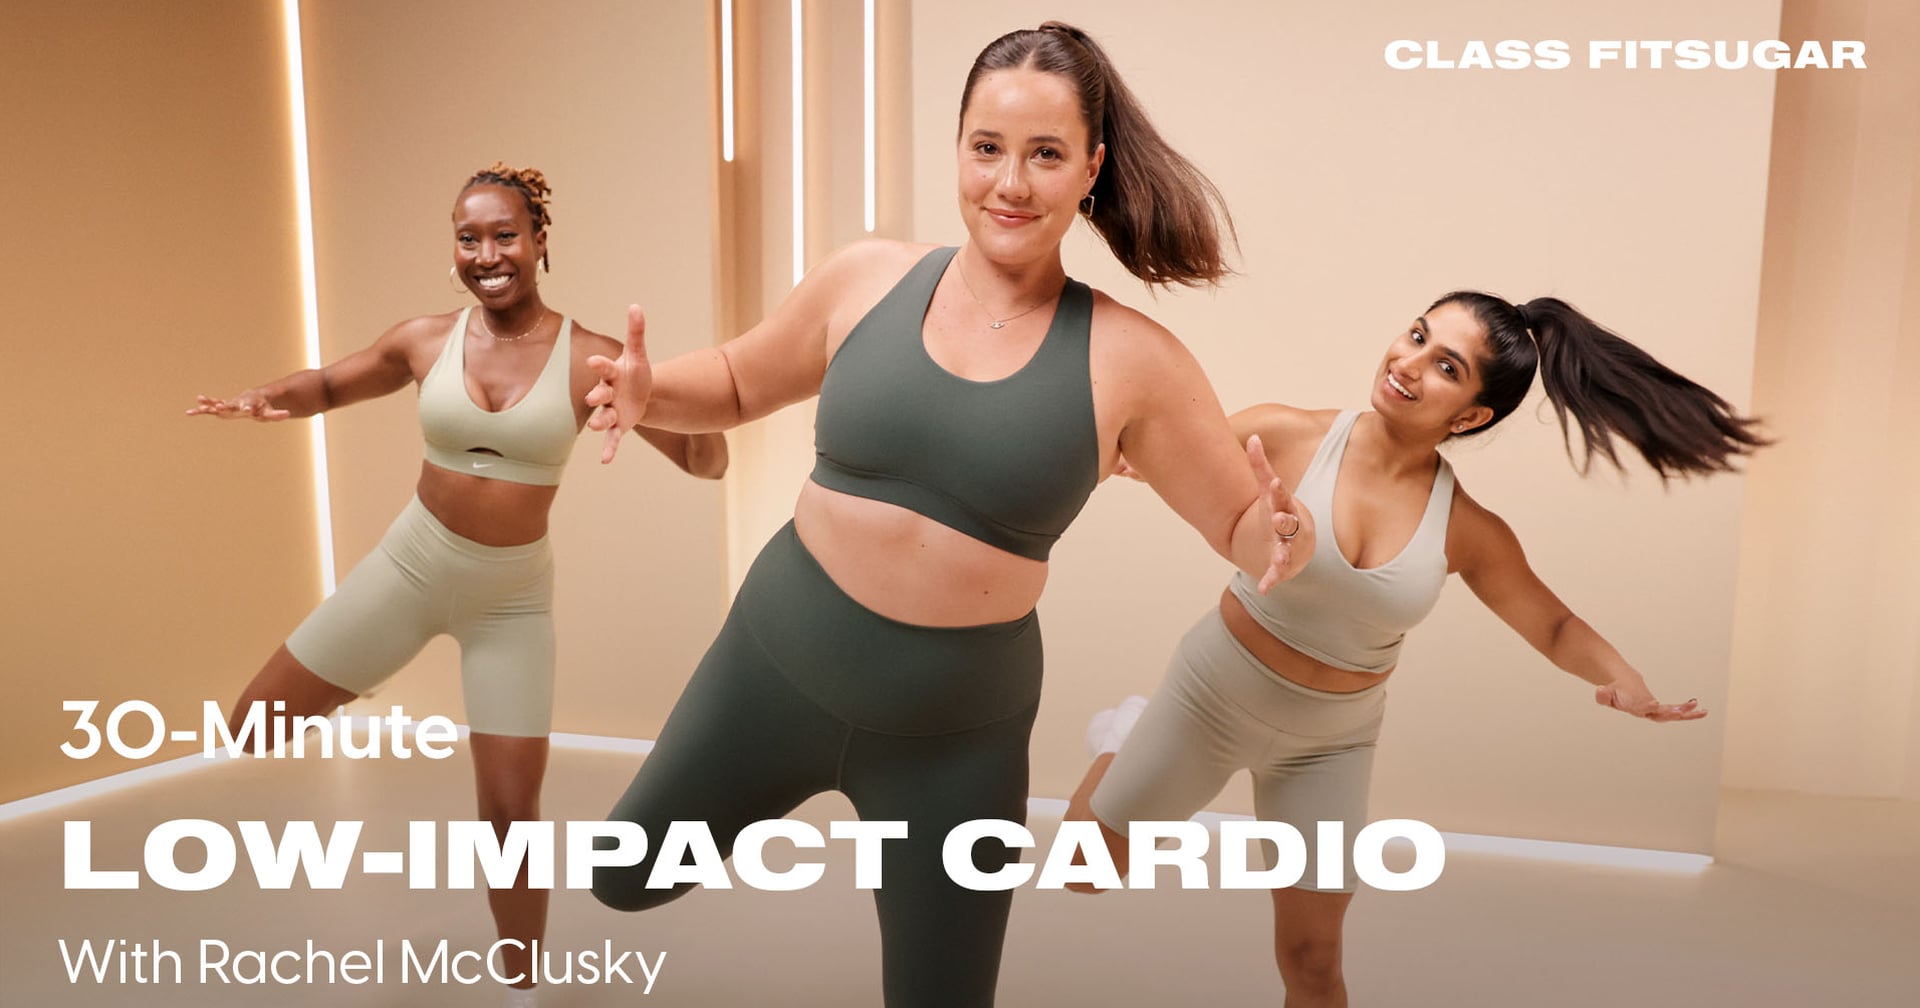 This 30-Minute Low-Impact Cardio Workout Targets Your Entire Body